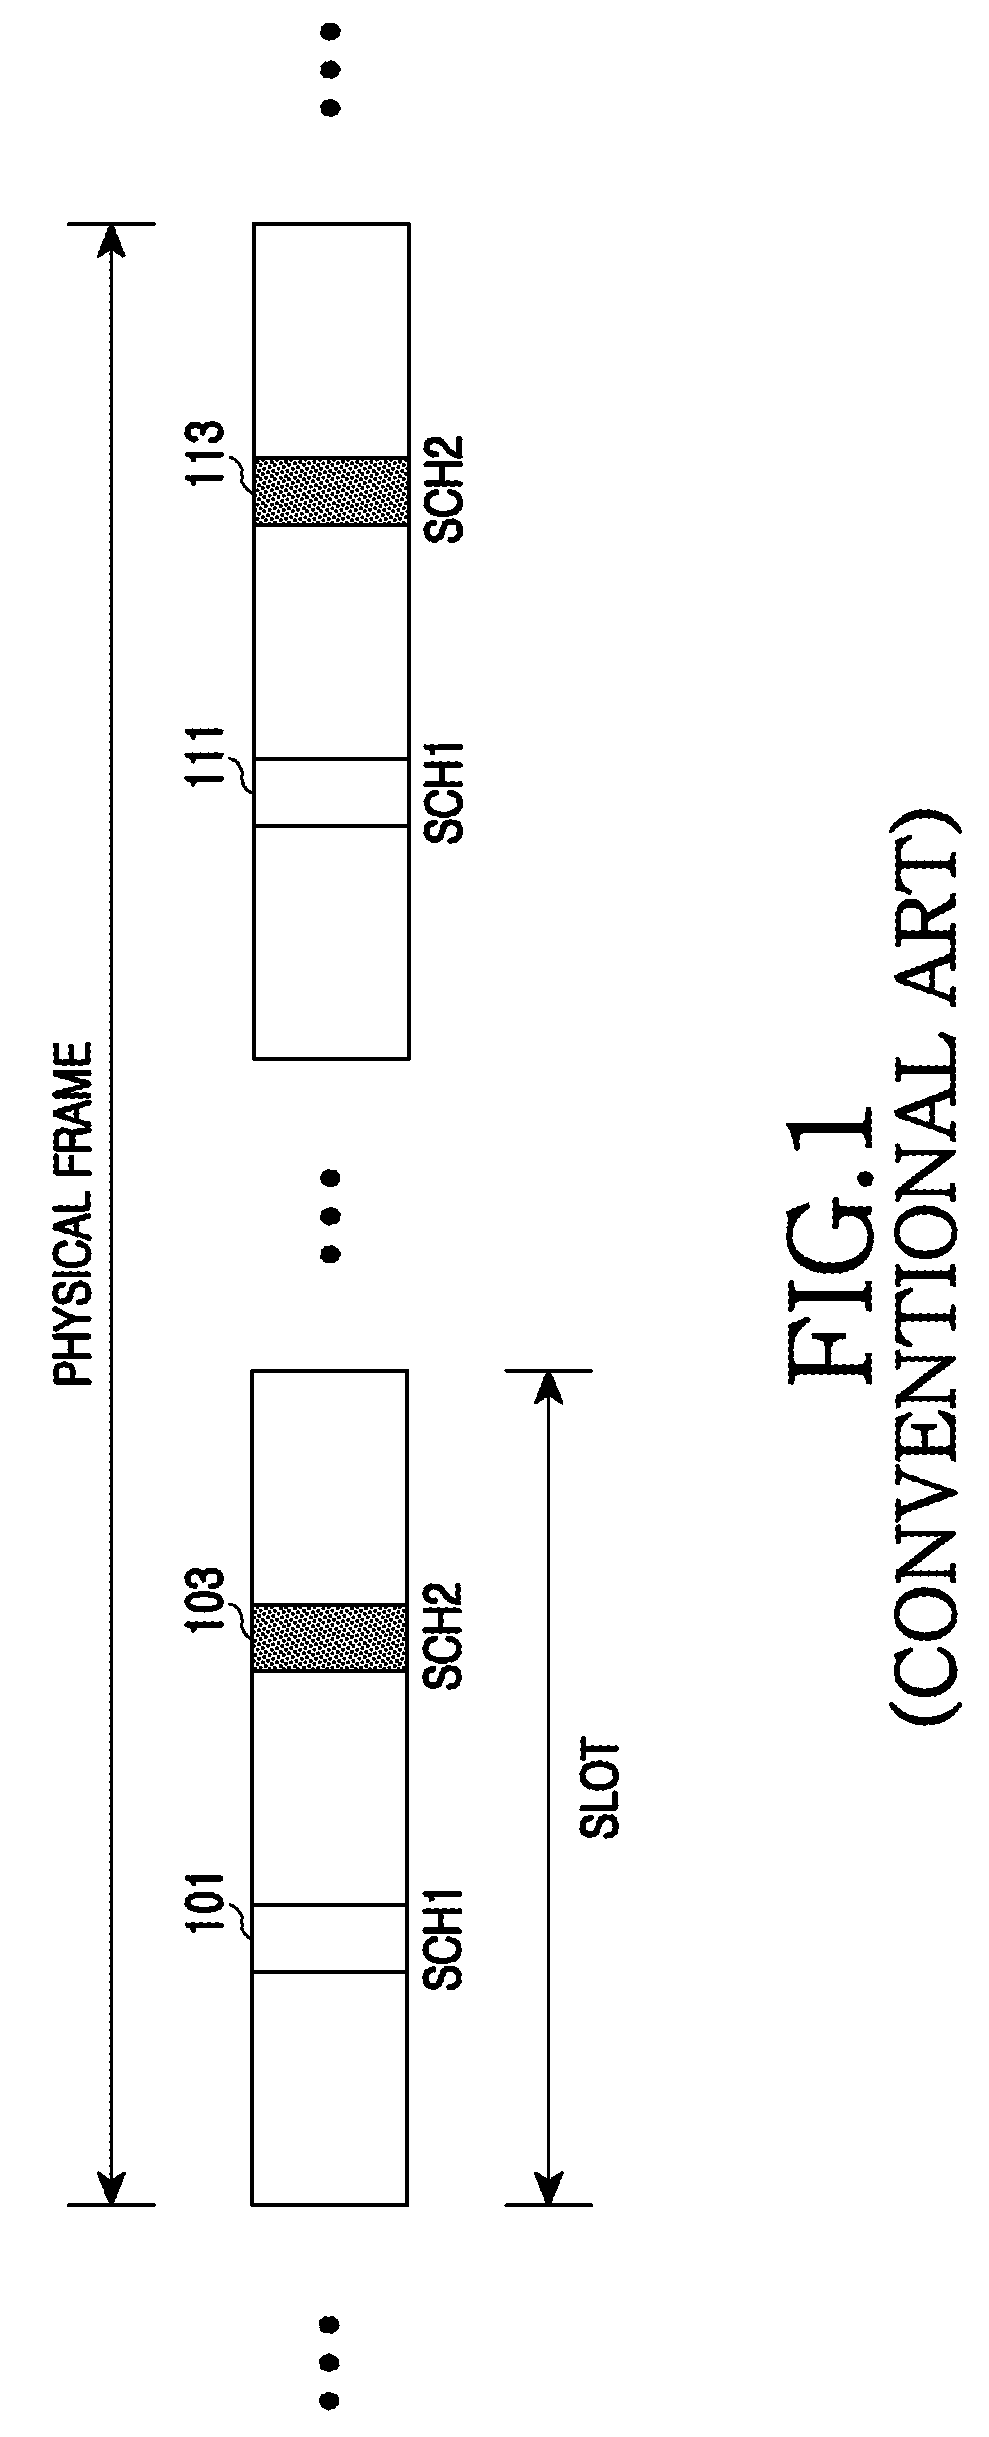 Apparatus and method for cell searching in wireless communication system